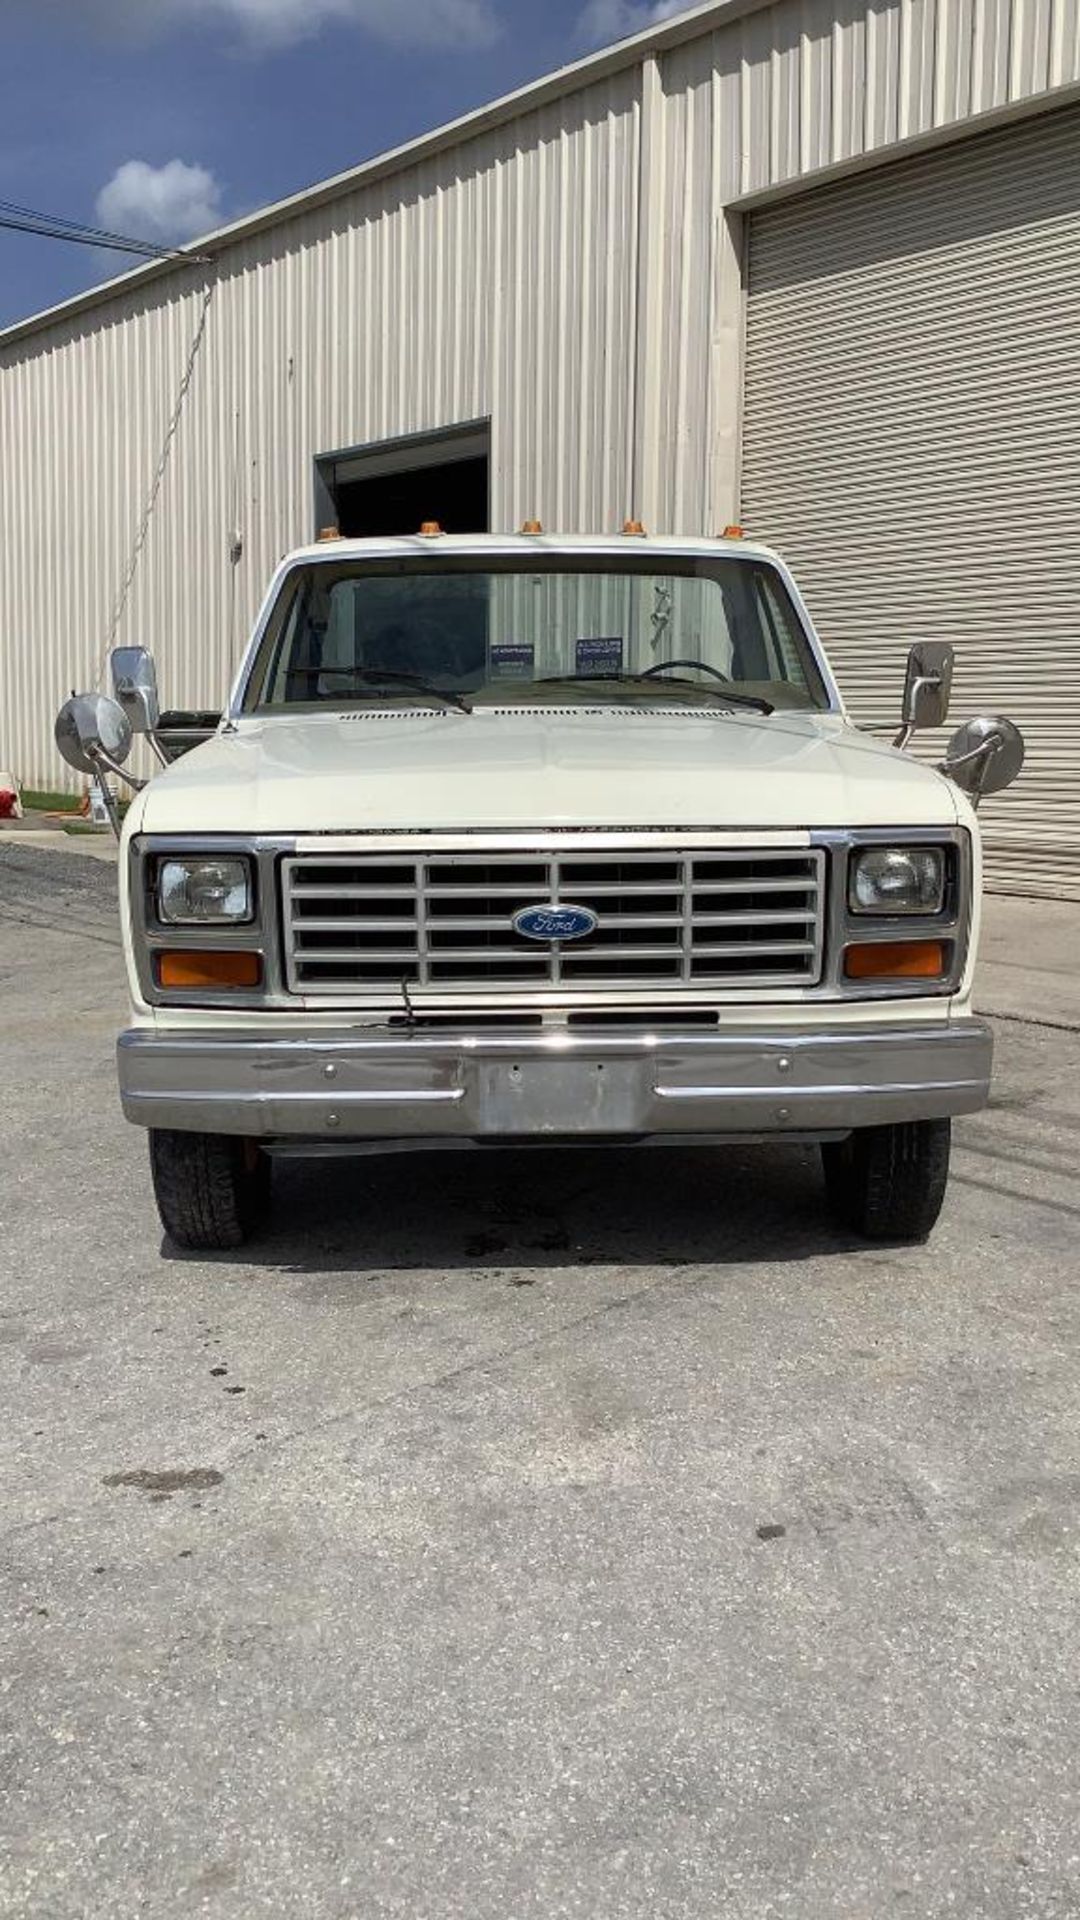 1985 Ford F-350 Regular Cab Chassis Truck 2WD - Image 5 of 83